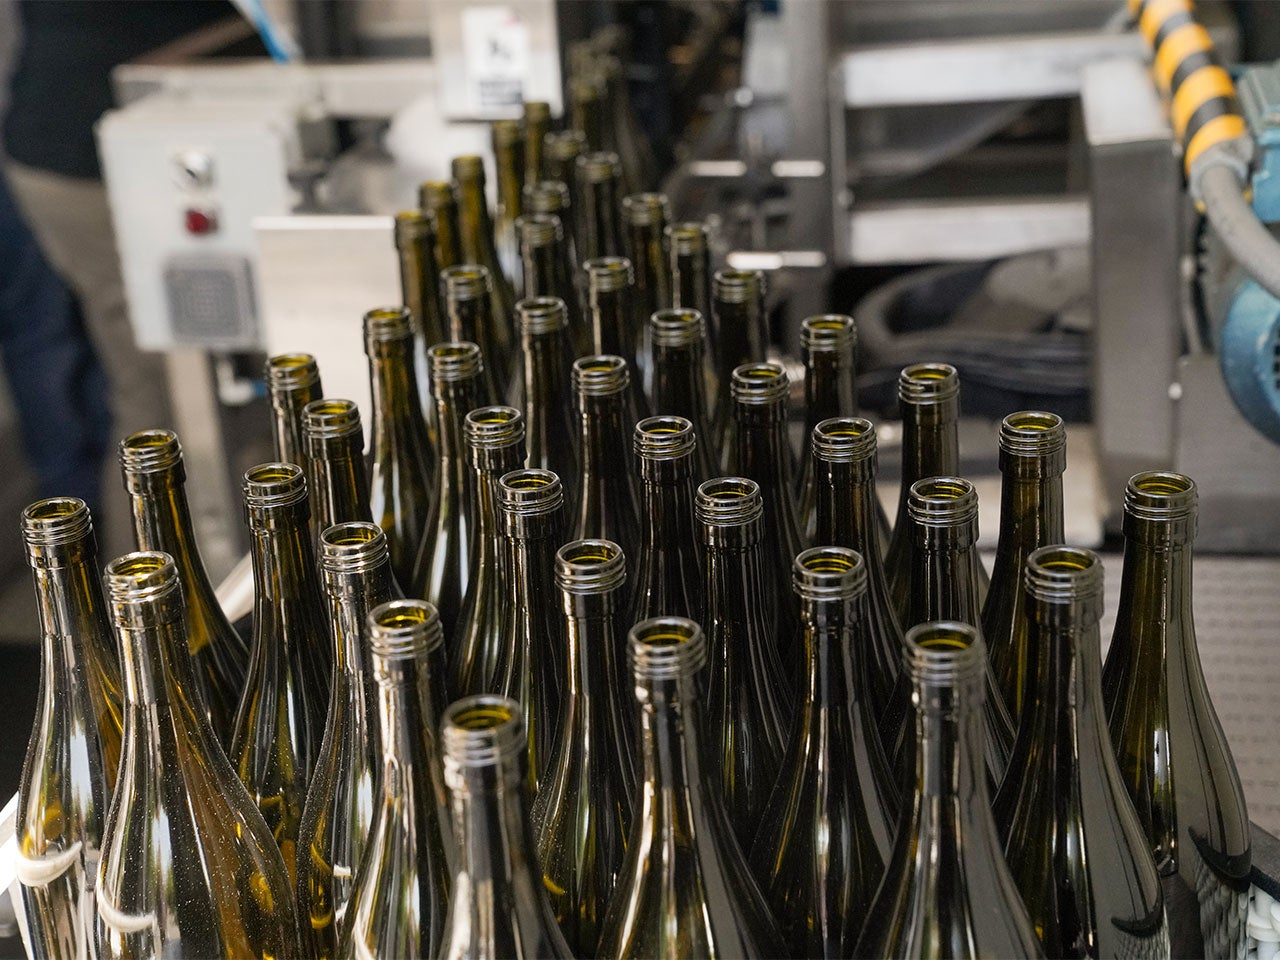 A large group of empty wine bottles on a conveyer belt